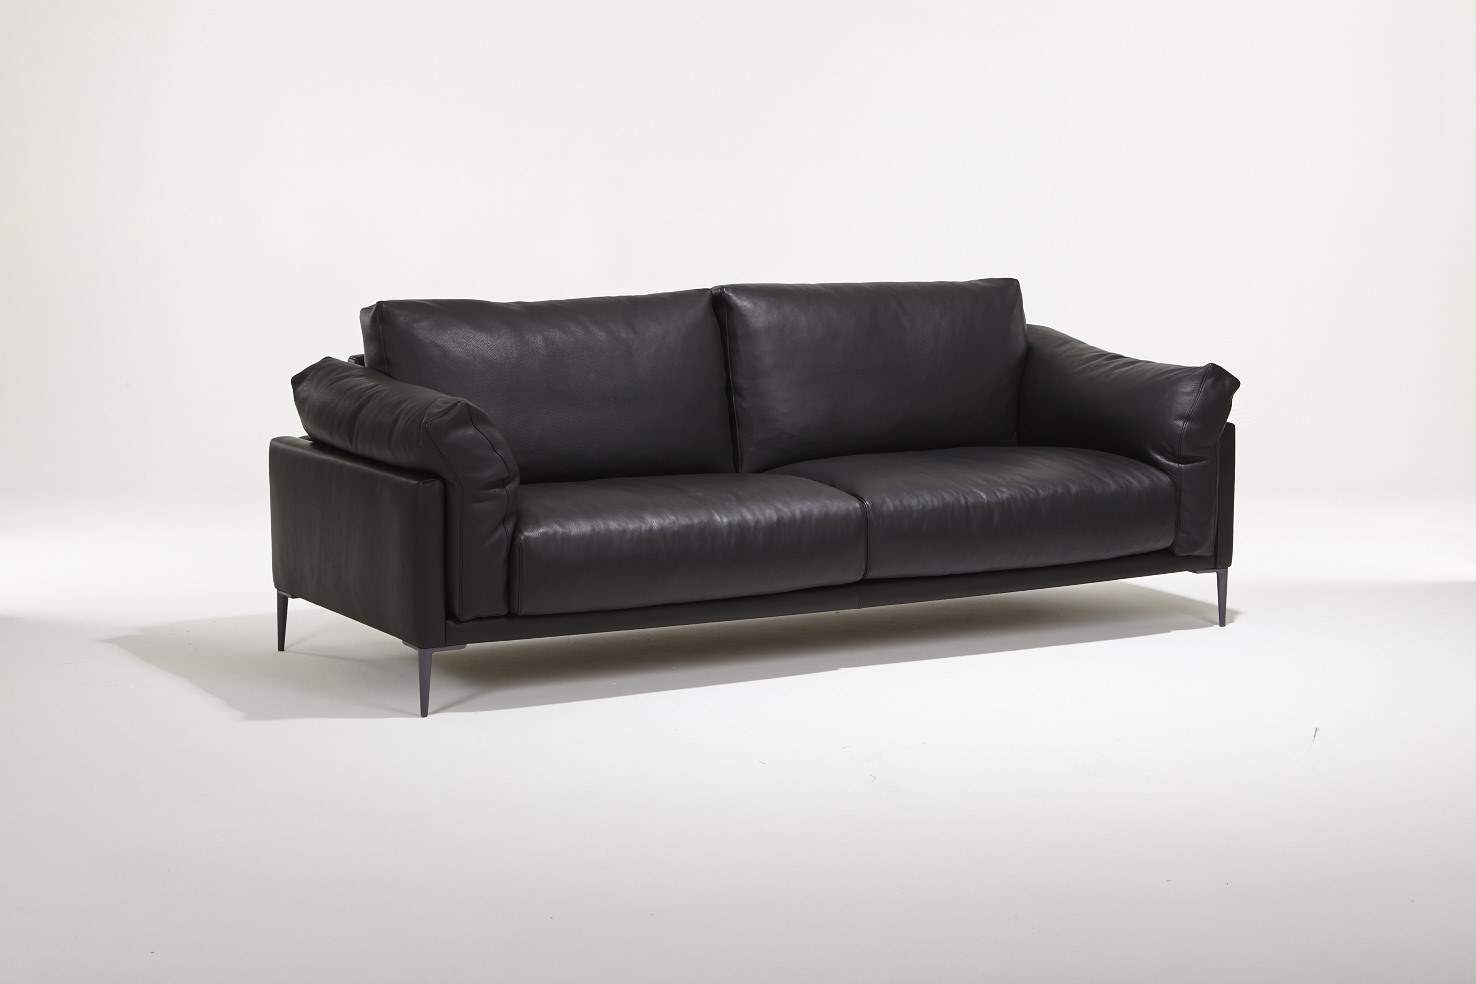 Beaubourg Leather Sofa Brown, Highest Quality Leather Furniture Manufacturers